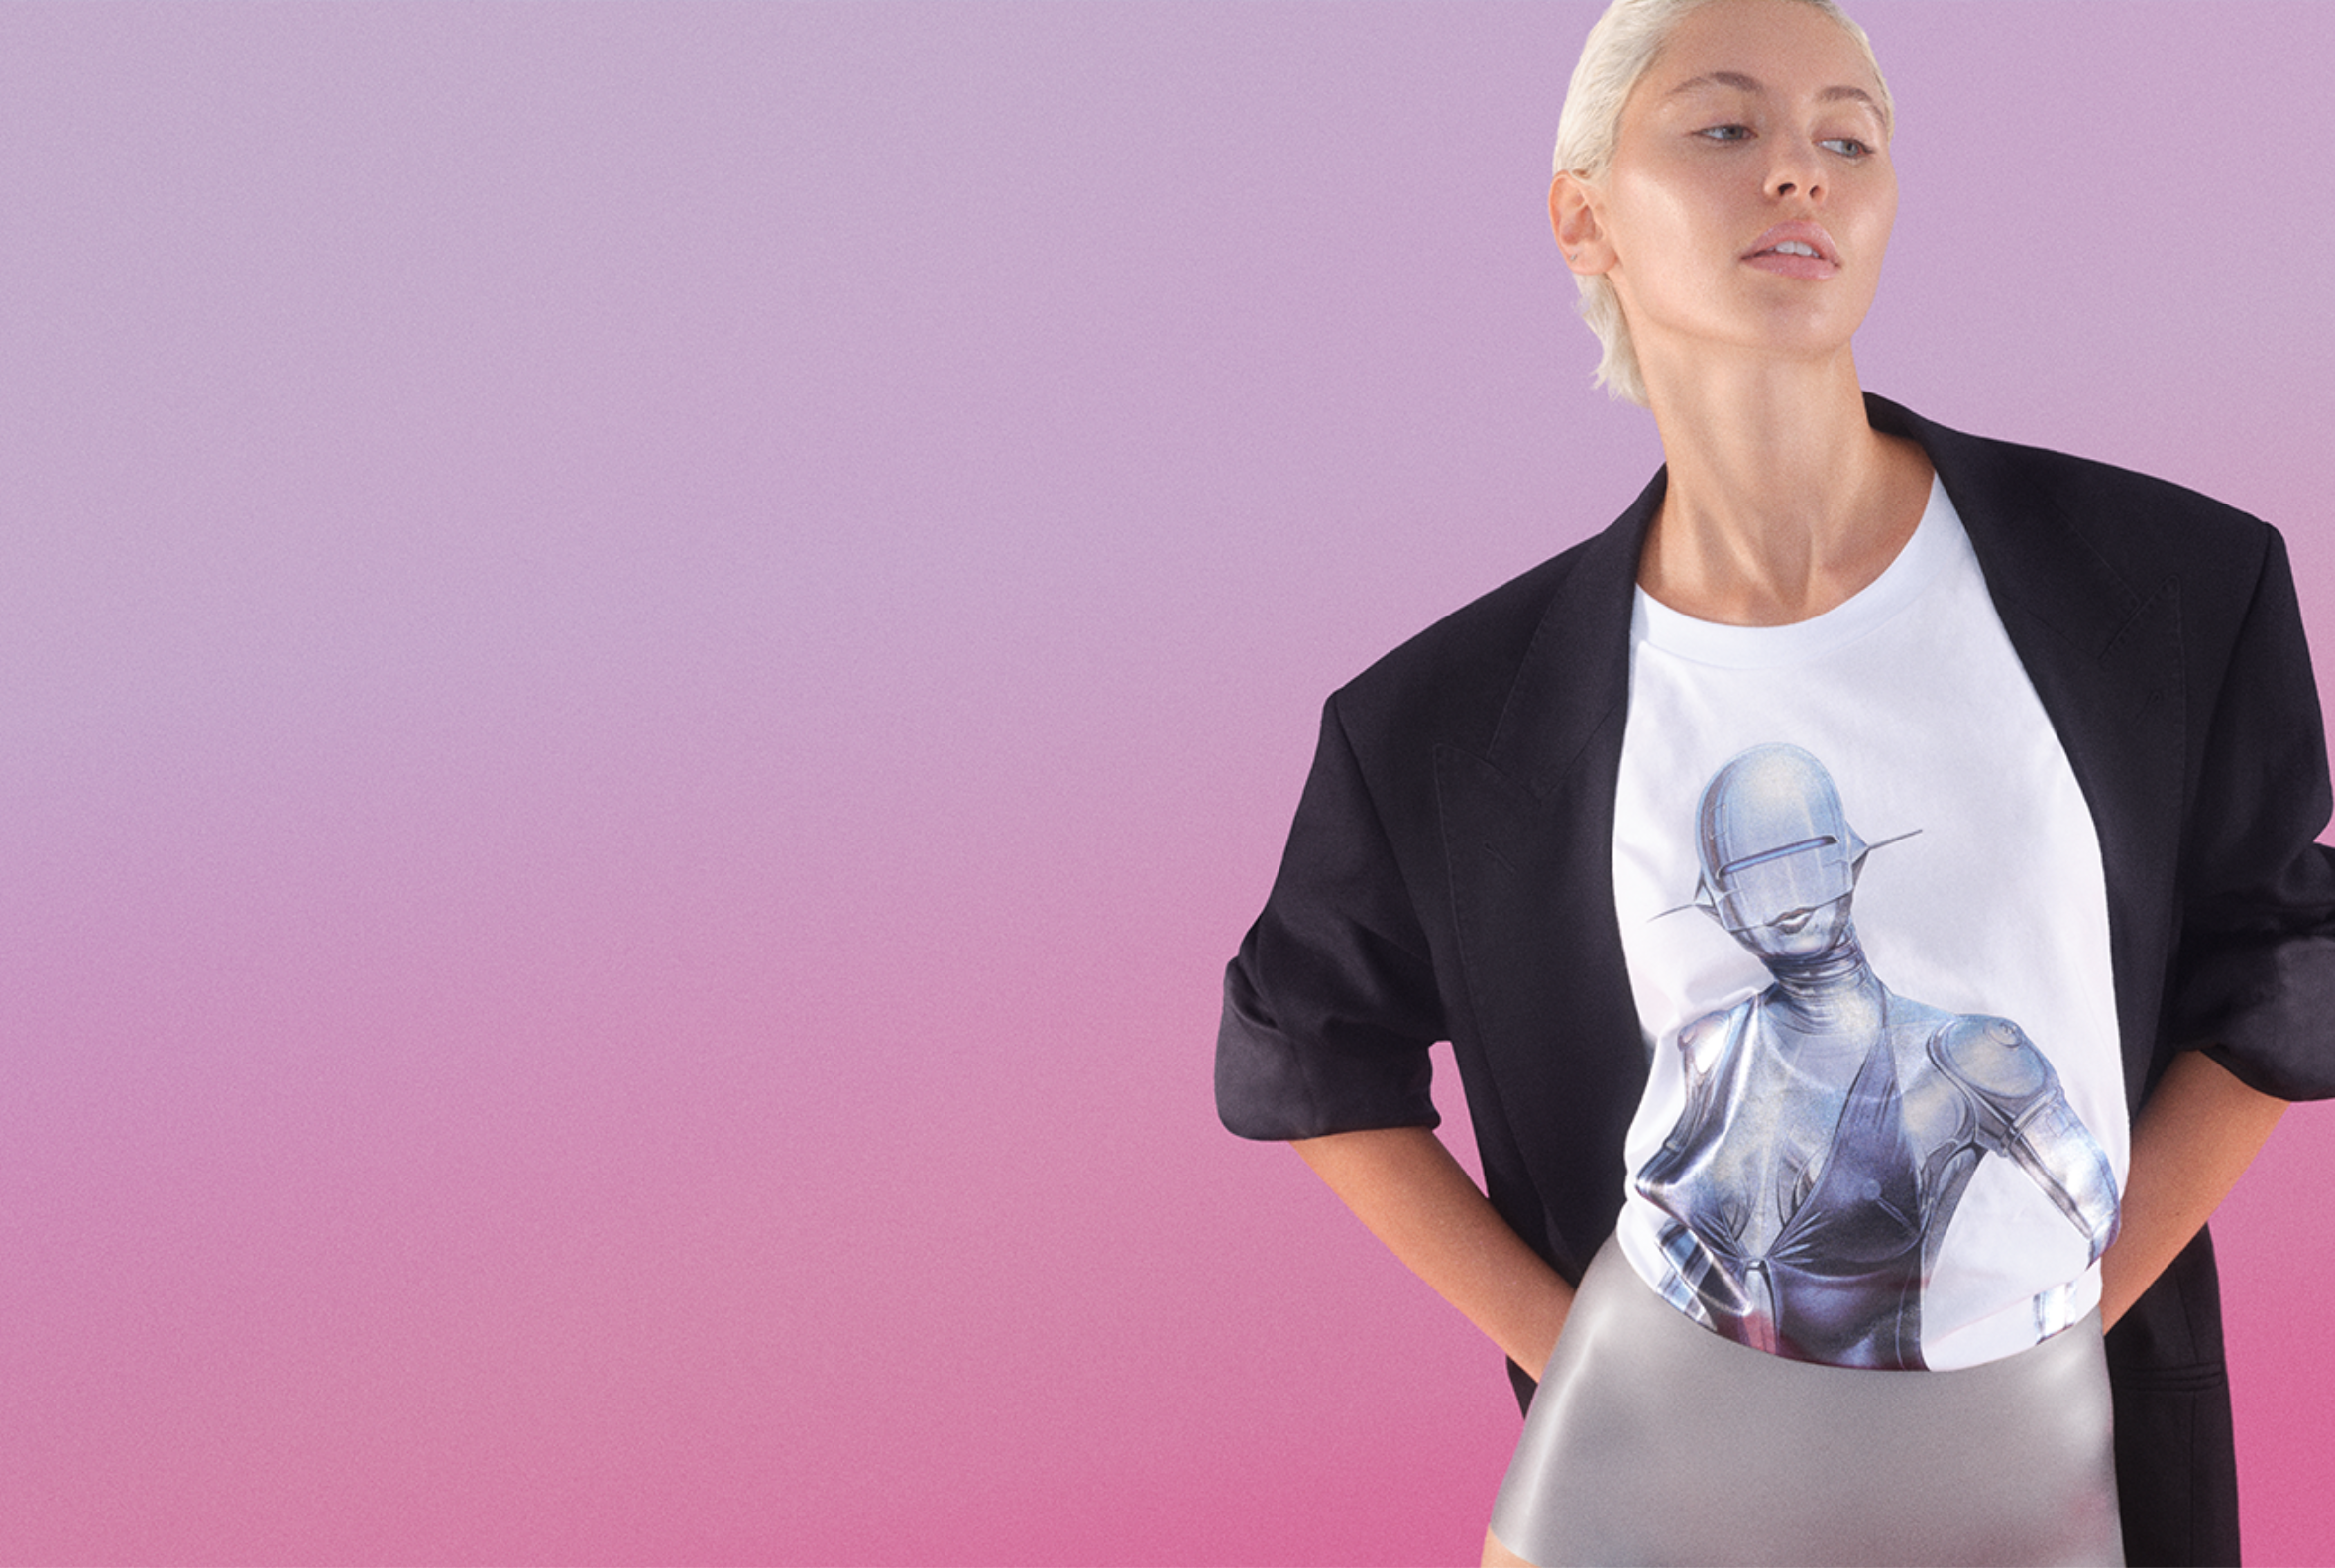 Japanese illustrator Hajime Sorayama has collaborated with Stella McCartney on a unisex colletion, with Iris Law in the campaign. Photo: Stella McCartney